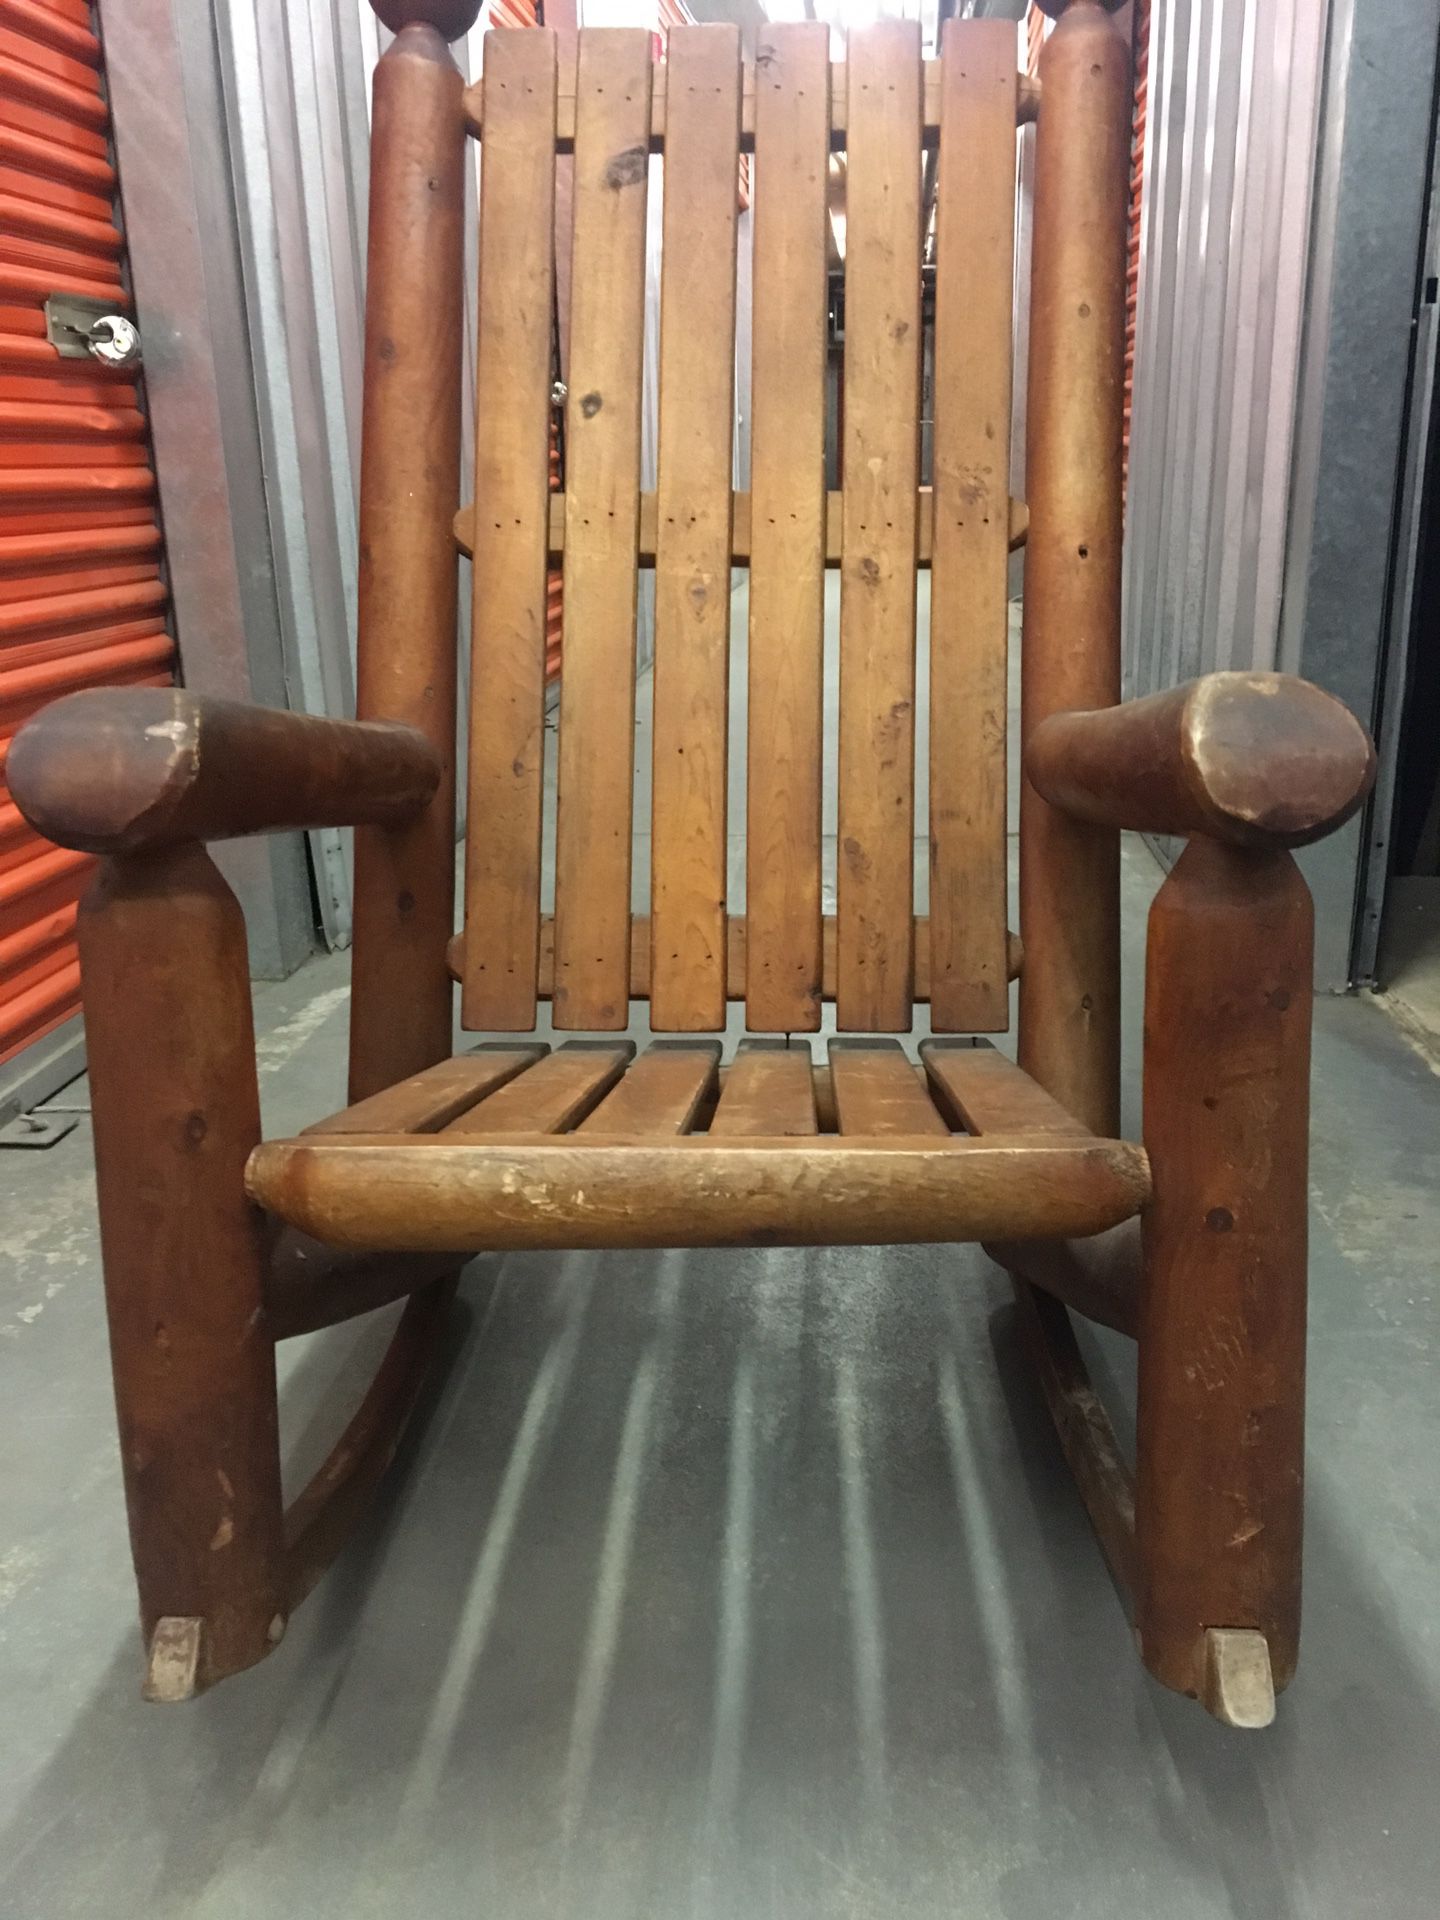 Oversized Wooden Rocking Chair